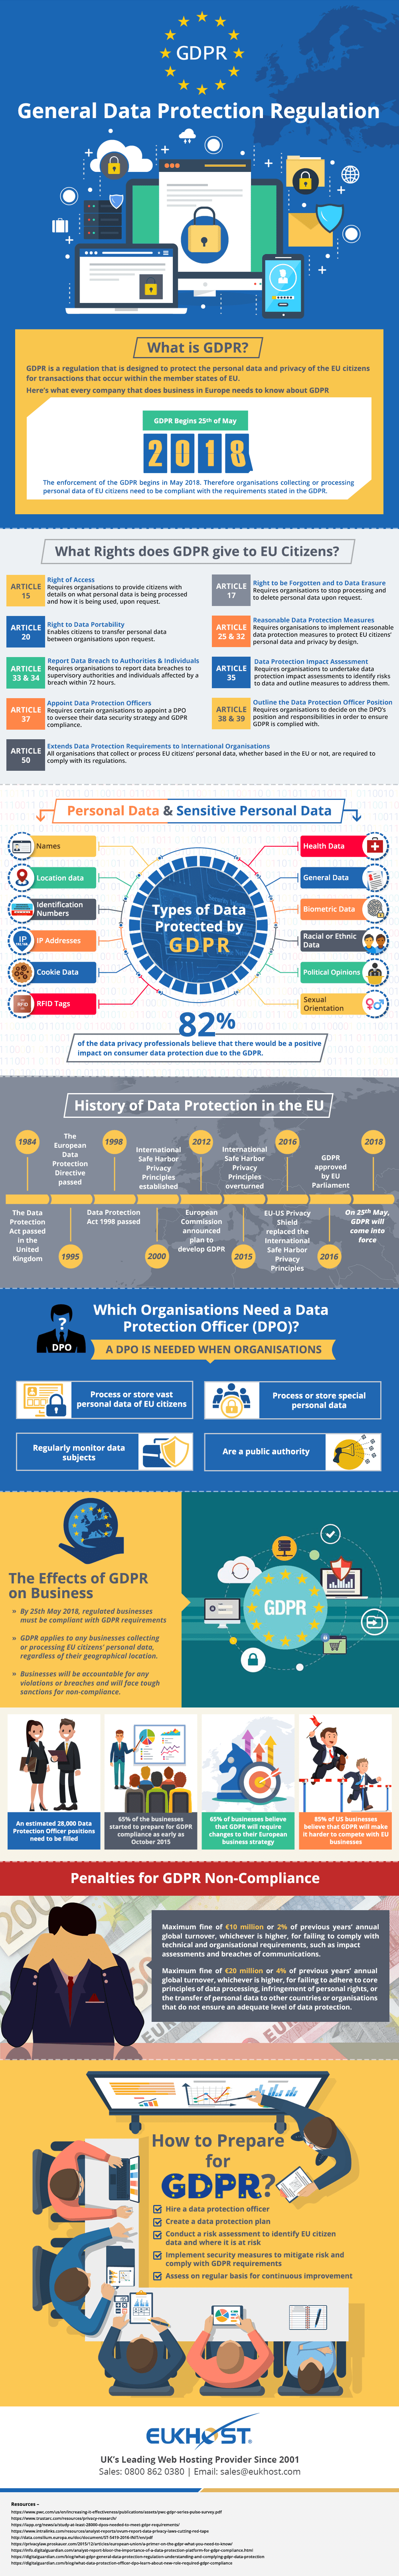 GDPR infographic by EUKHost